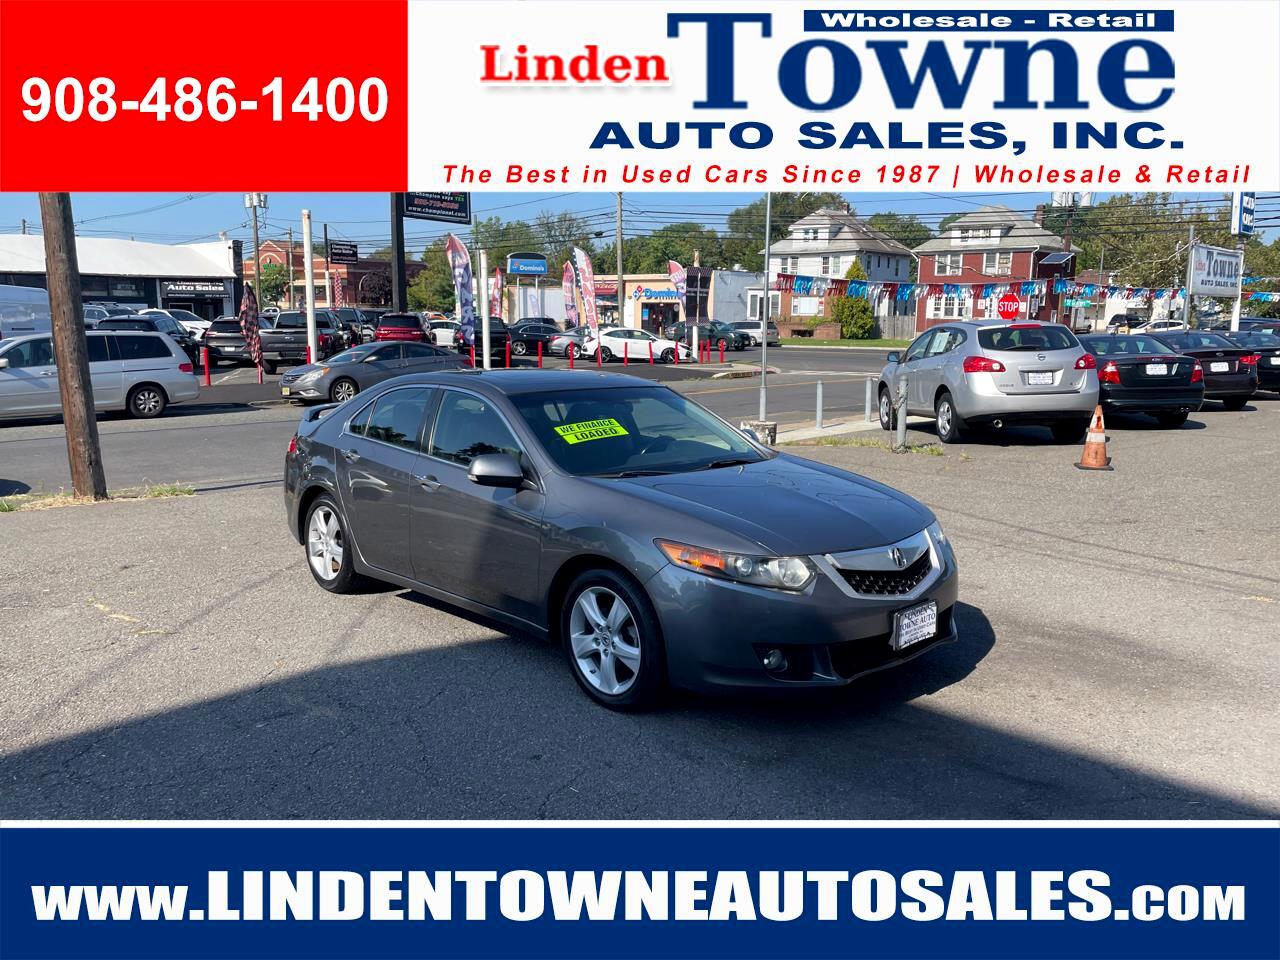 Used Cars for Sale Linden NJ 07036 Linden Towne Auto Sales, Inc.